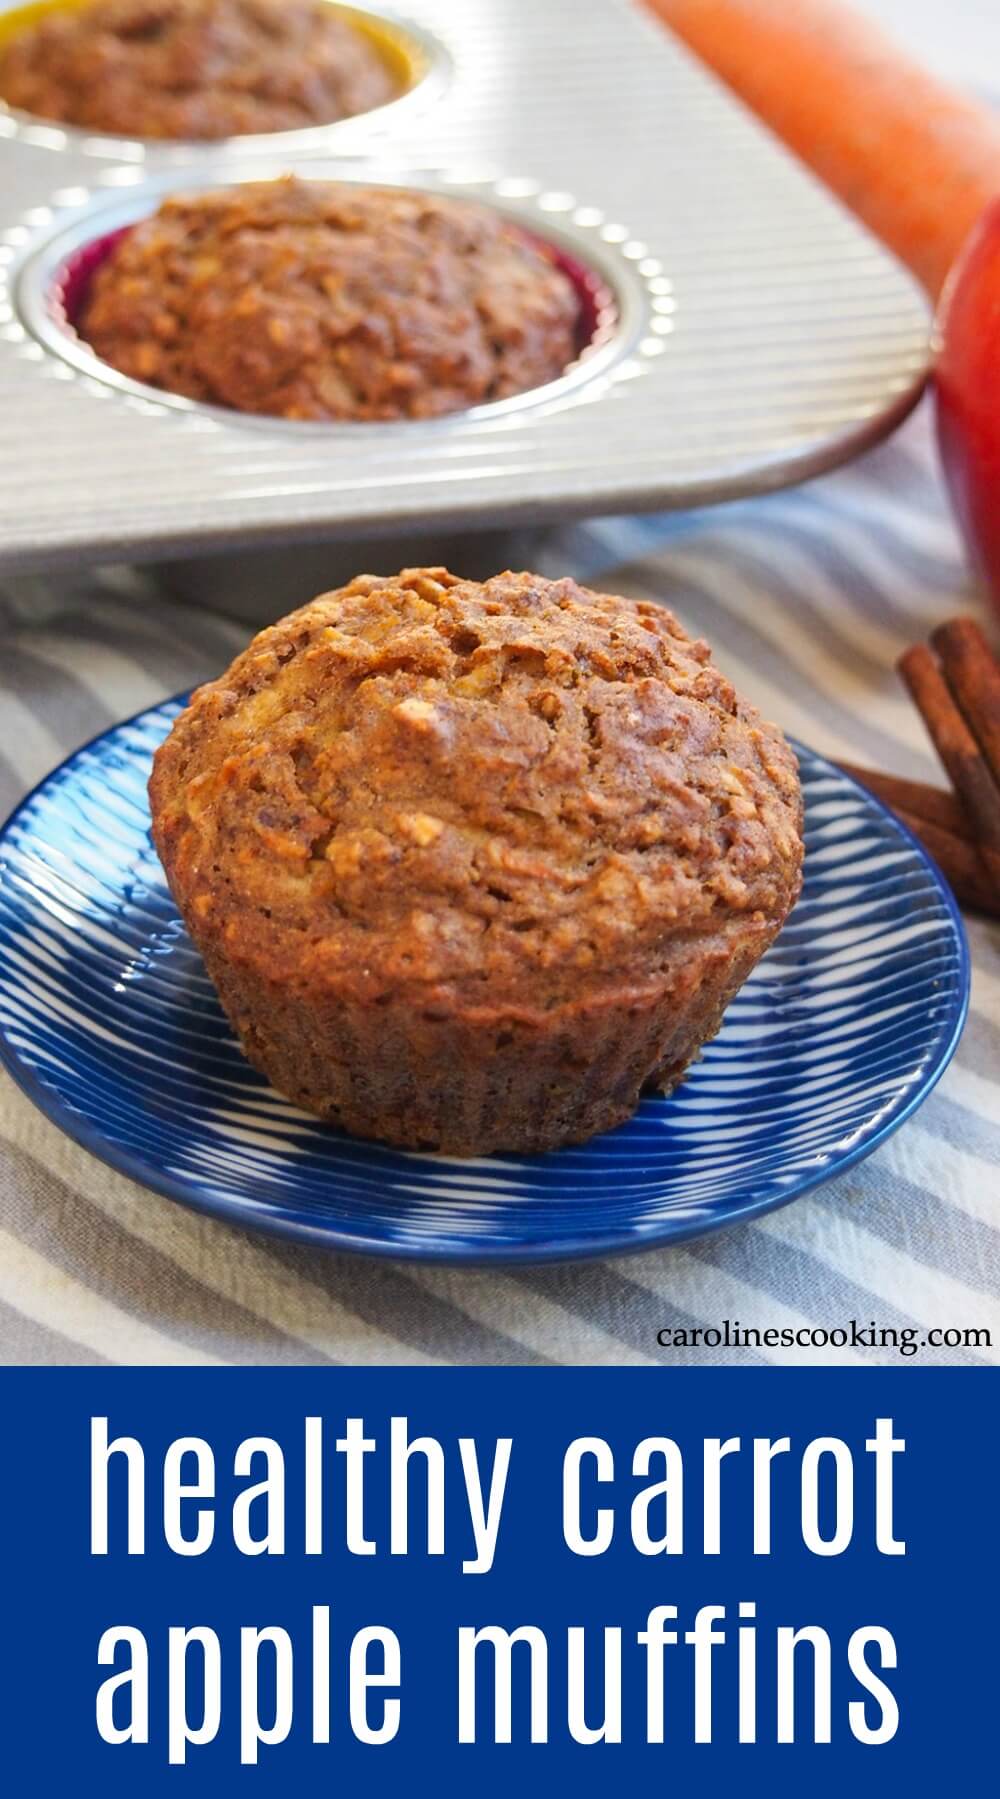 These naturally-sweetened carrot apple muffins have a delicious, gently spiced flavor and moist texture.  They're easy to make and perfect for breakfast or a snack.  #muffin #refinedsugarfree #breakfast #snack #healthybaking